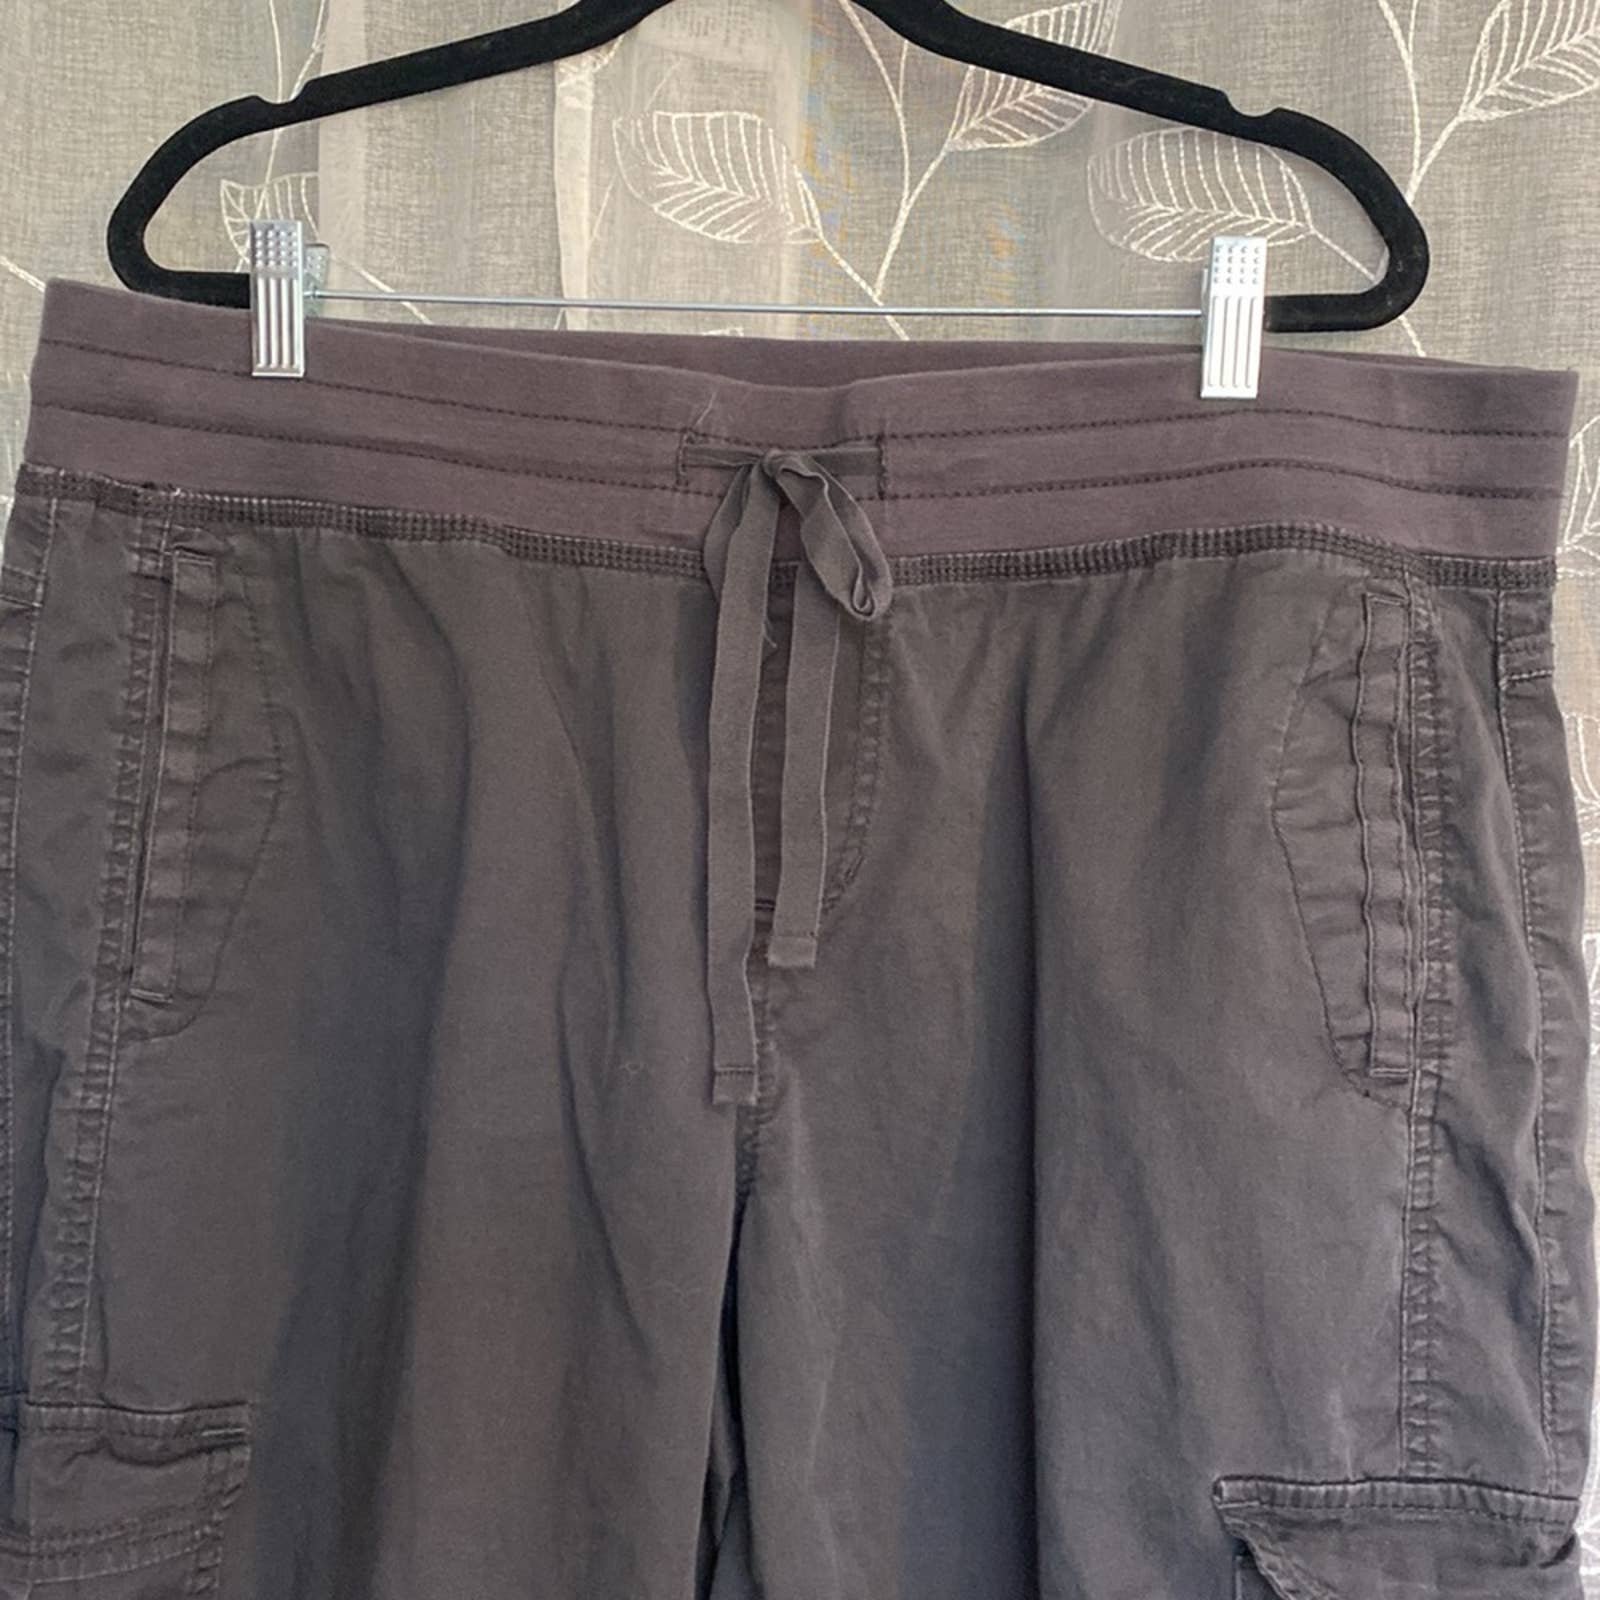 Simple Supplies gray cargo style pants drawstring waist Capri to full length pant pS00NnMU2 US Outlet